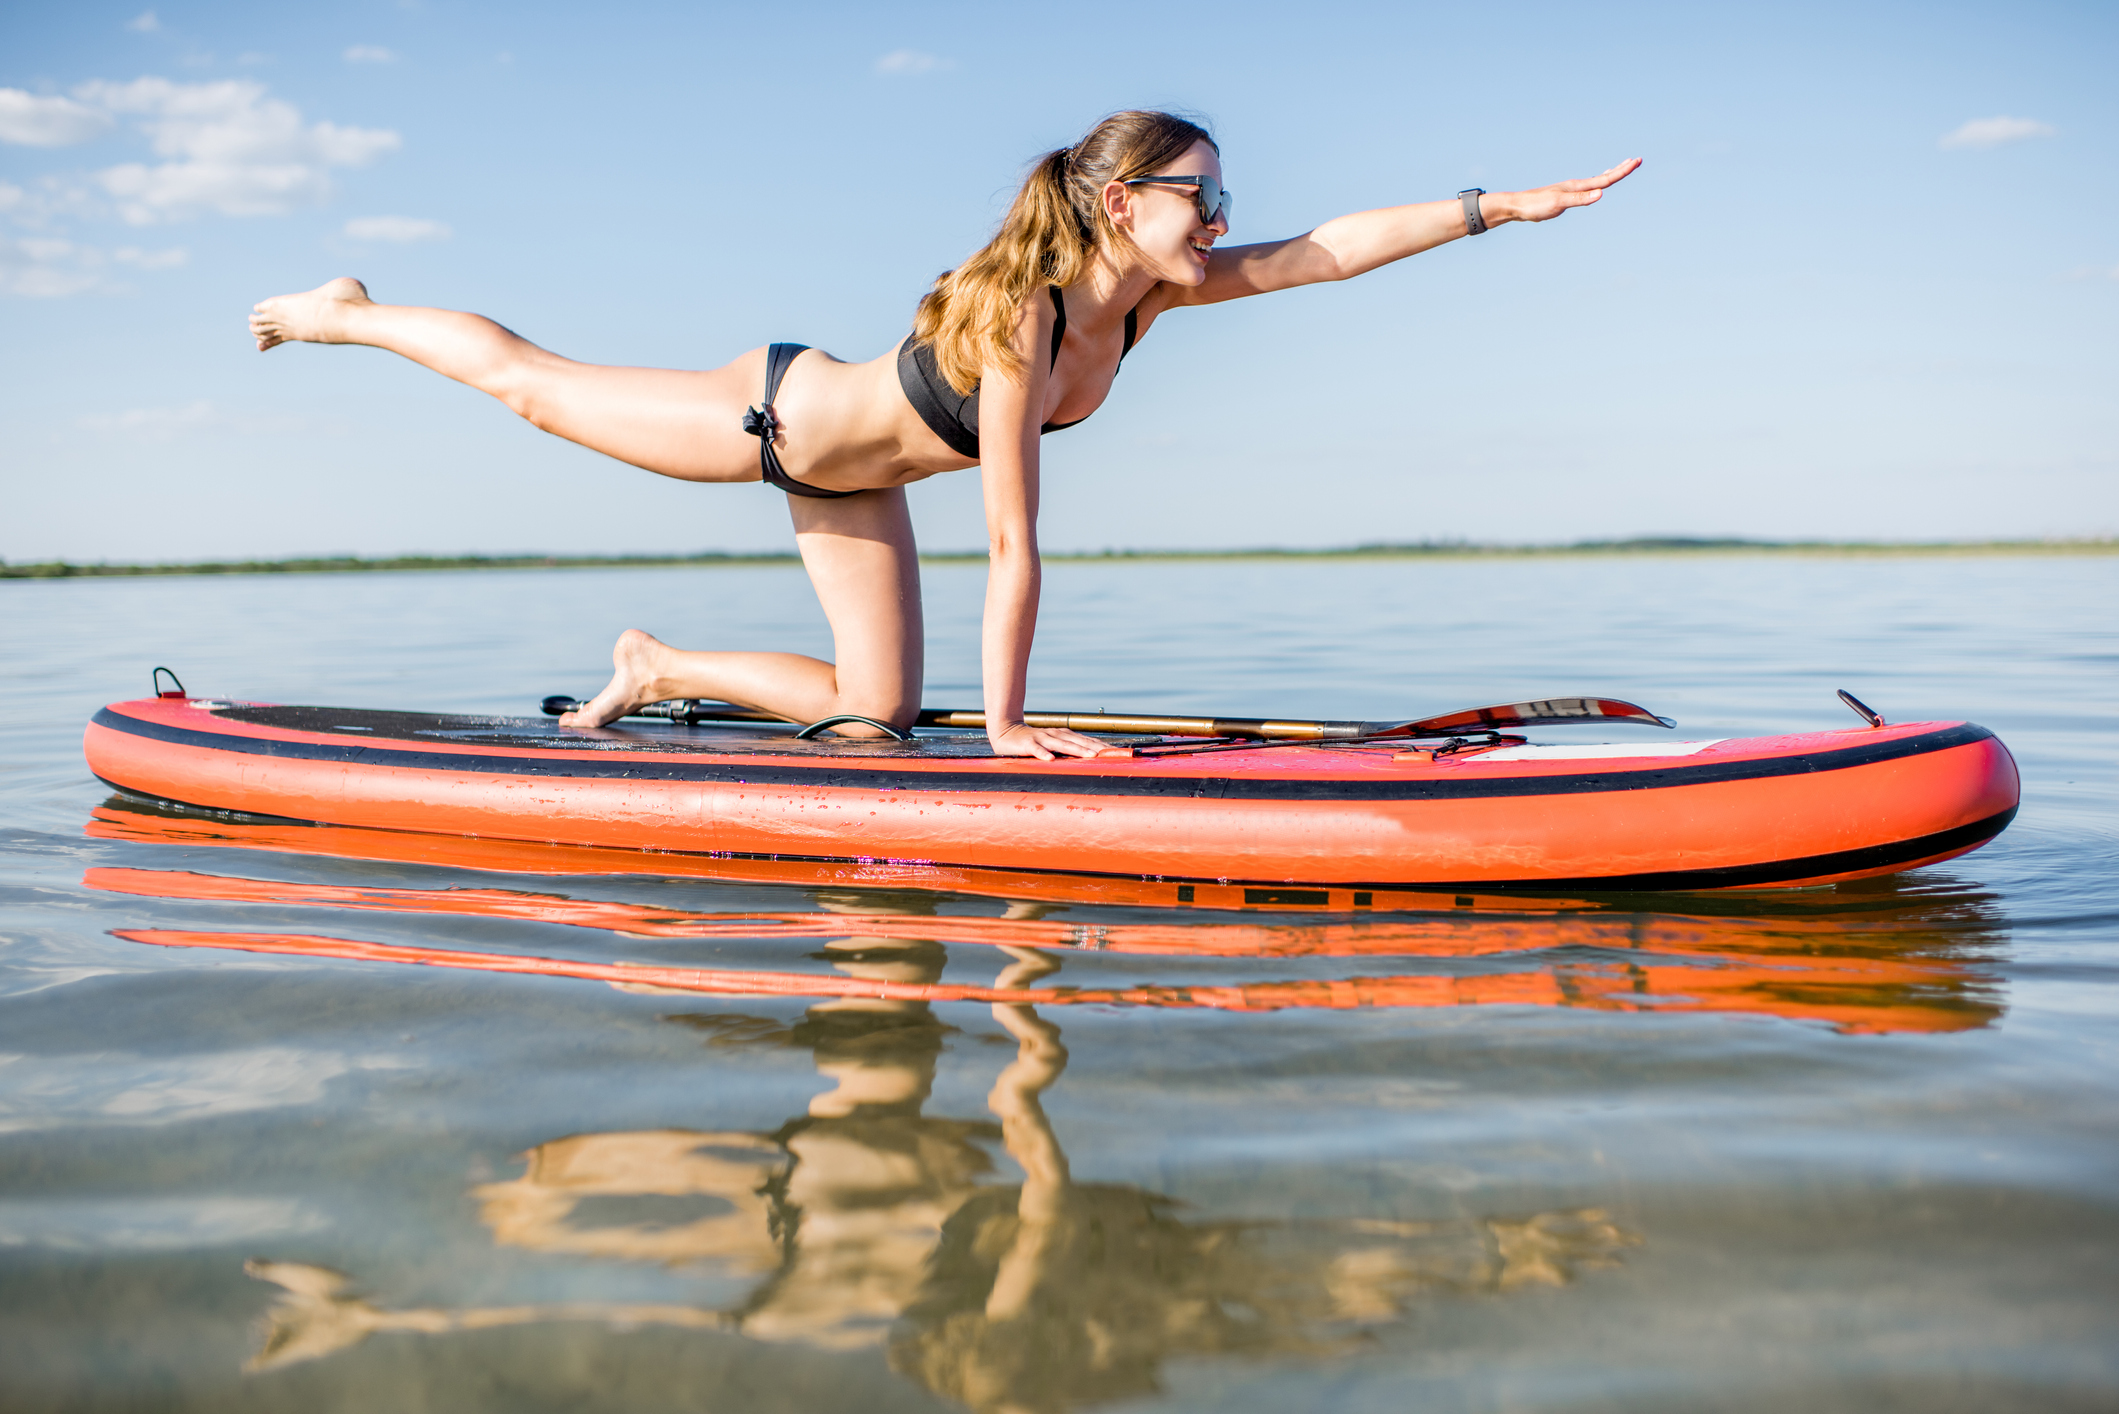 Paddleboarding plus yoga equals a unique, refreshing way to exercise in the Hamptons